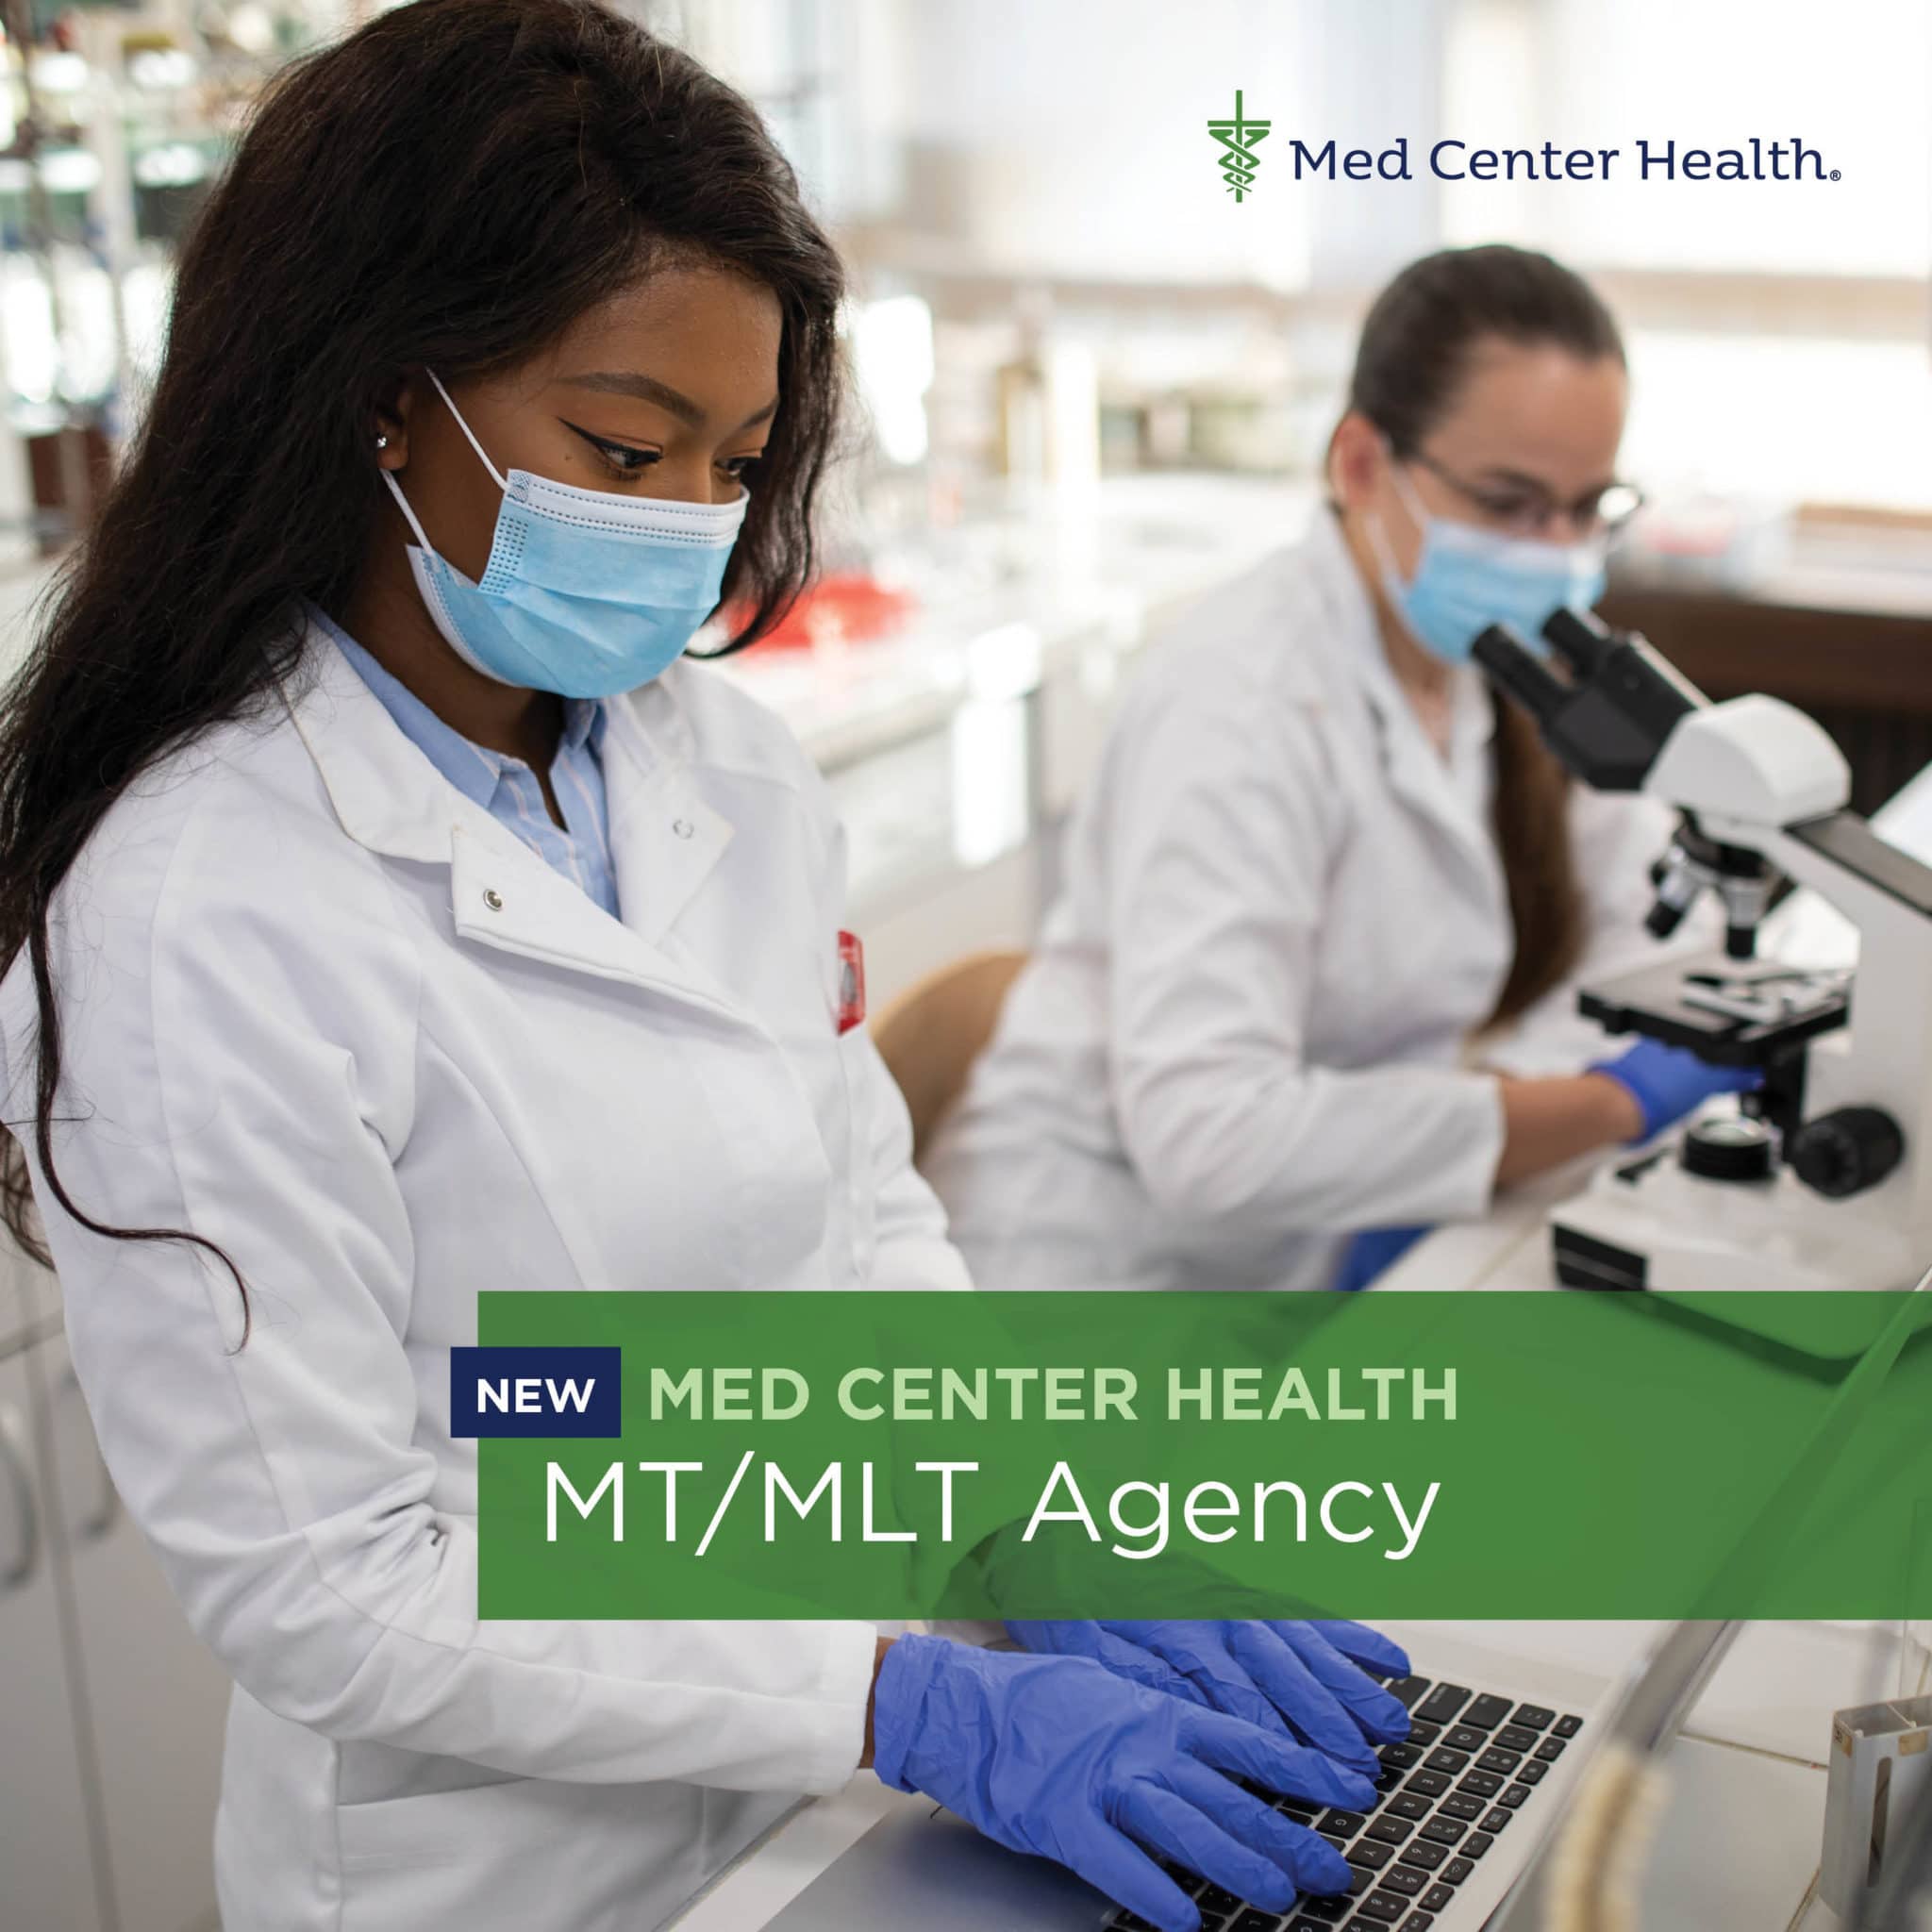 Become a Med Center Health Agency MT/MLT